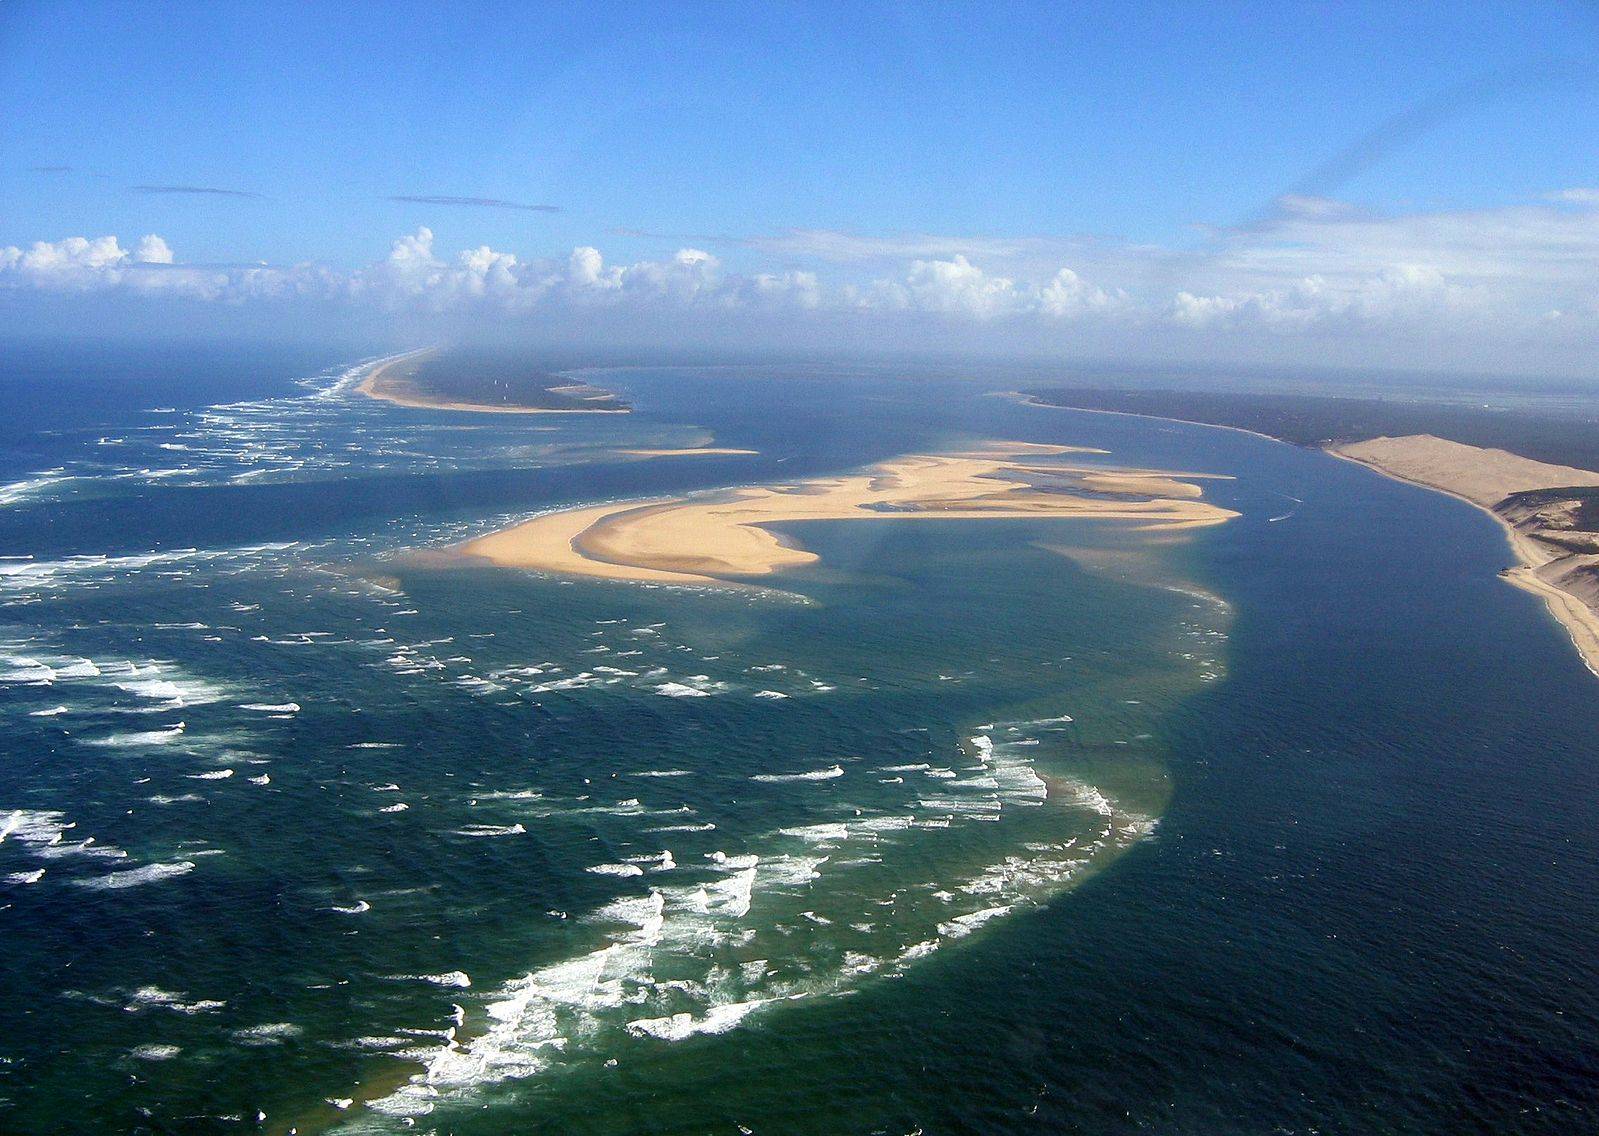 Discover the town of Arcachon on the Bassin d’Arcachon